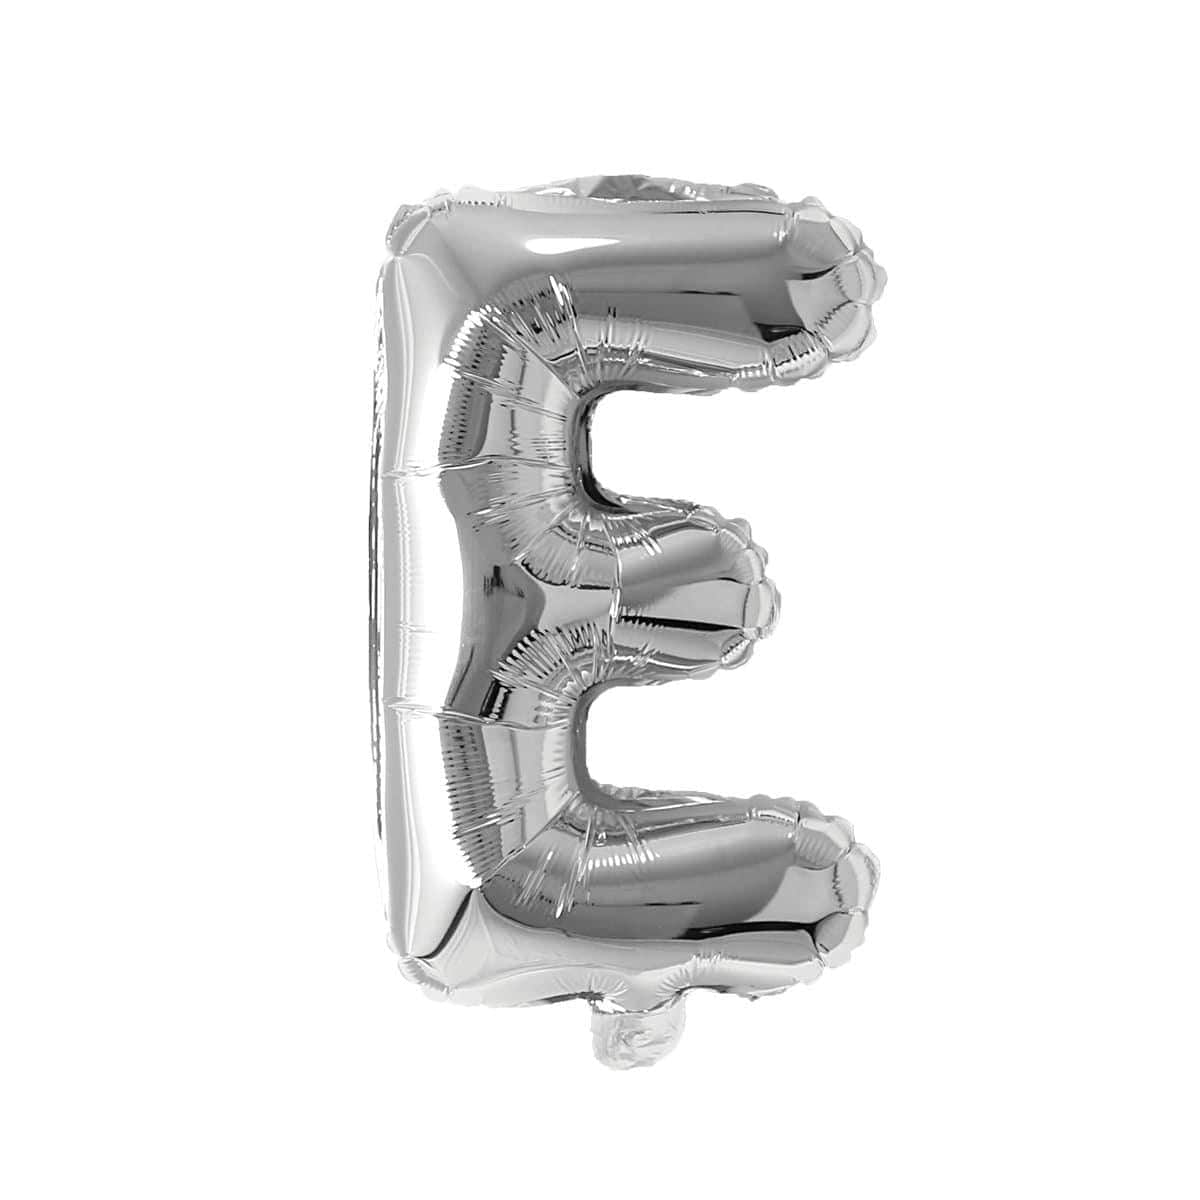 Buy Balloons Silver Letter E Foil Balloon, 16 Inches sold at Party Expert